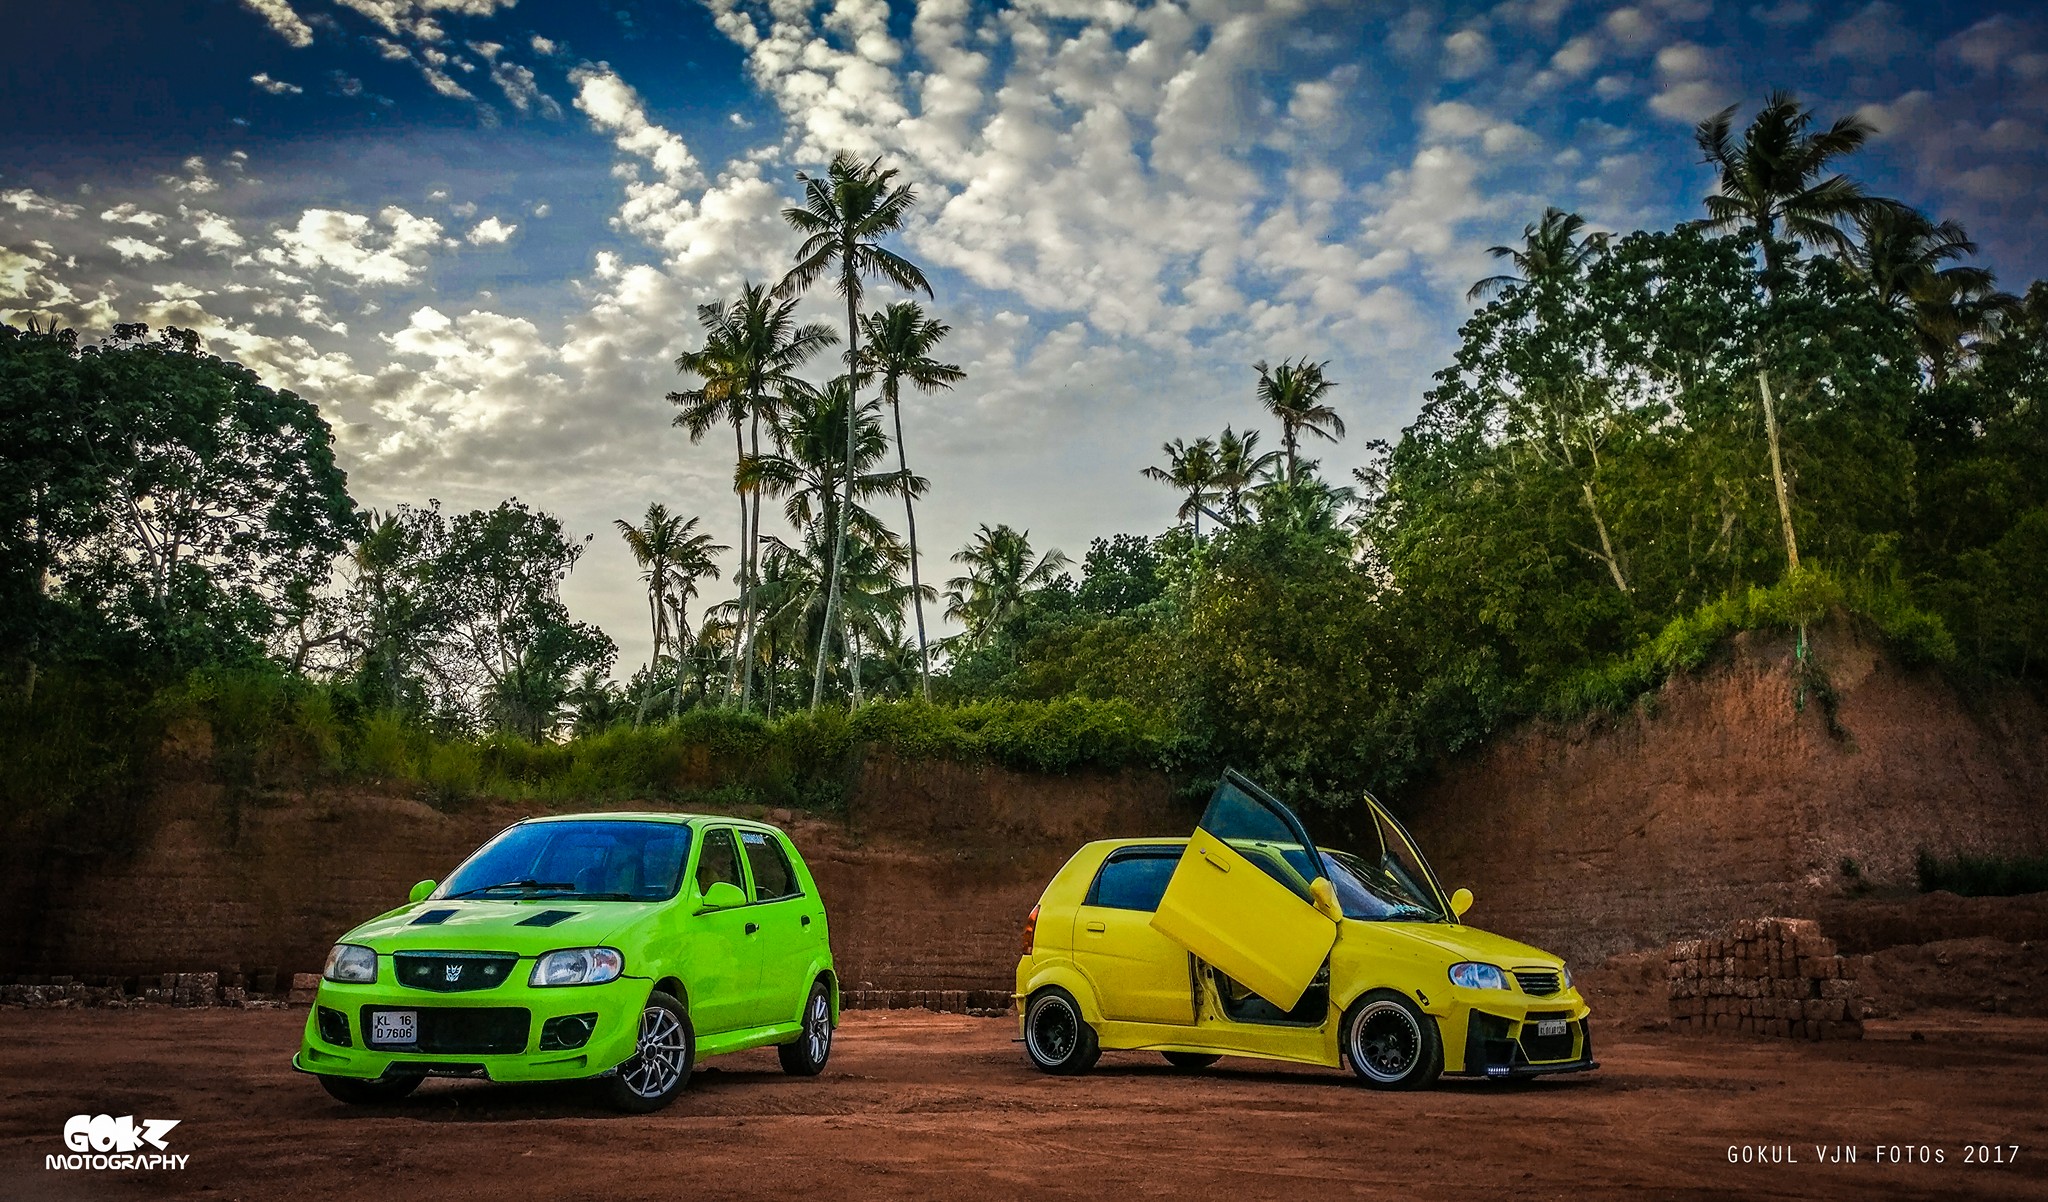 Modified Maruti Altos Eva And Mr Yellow From Kerala In Images